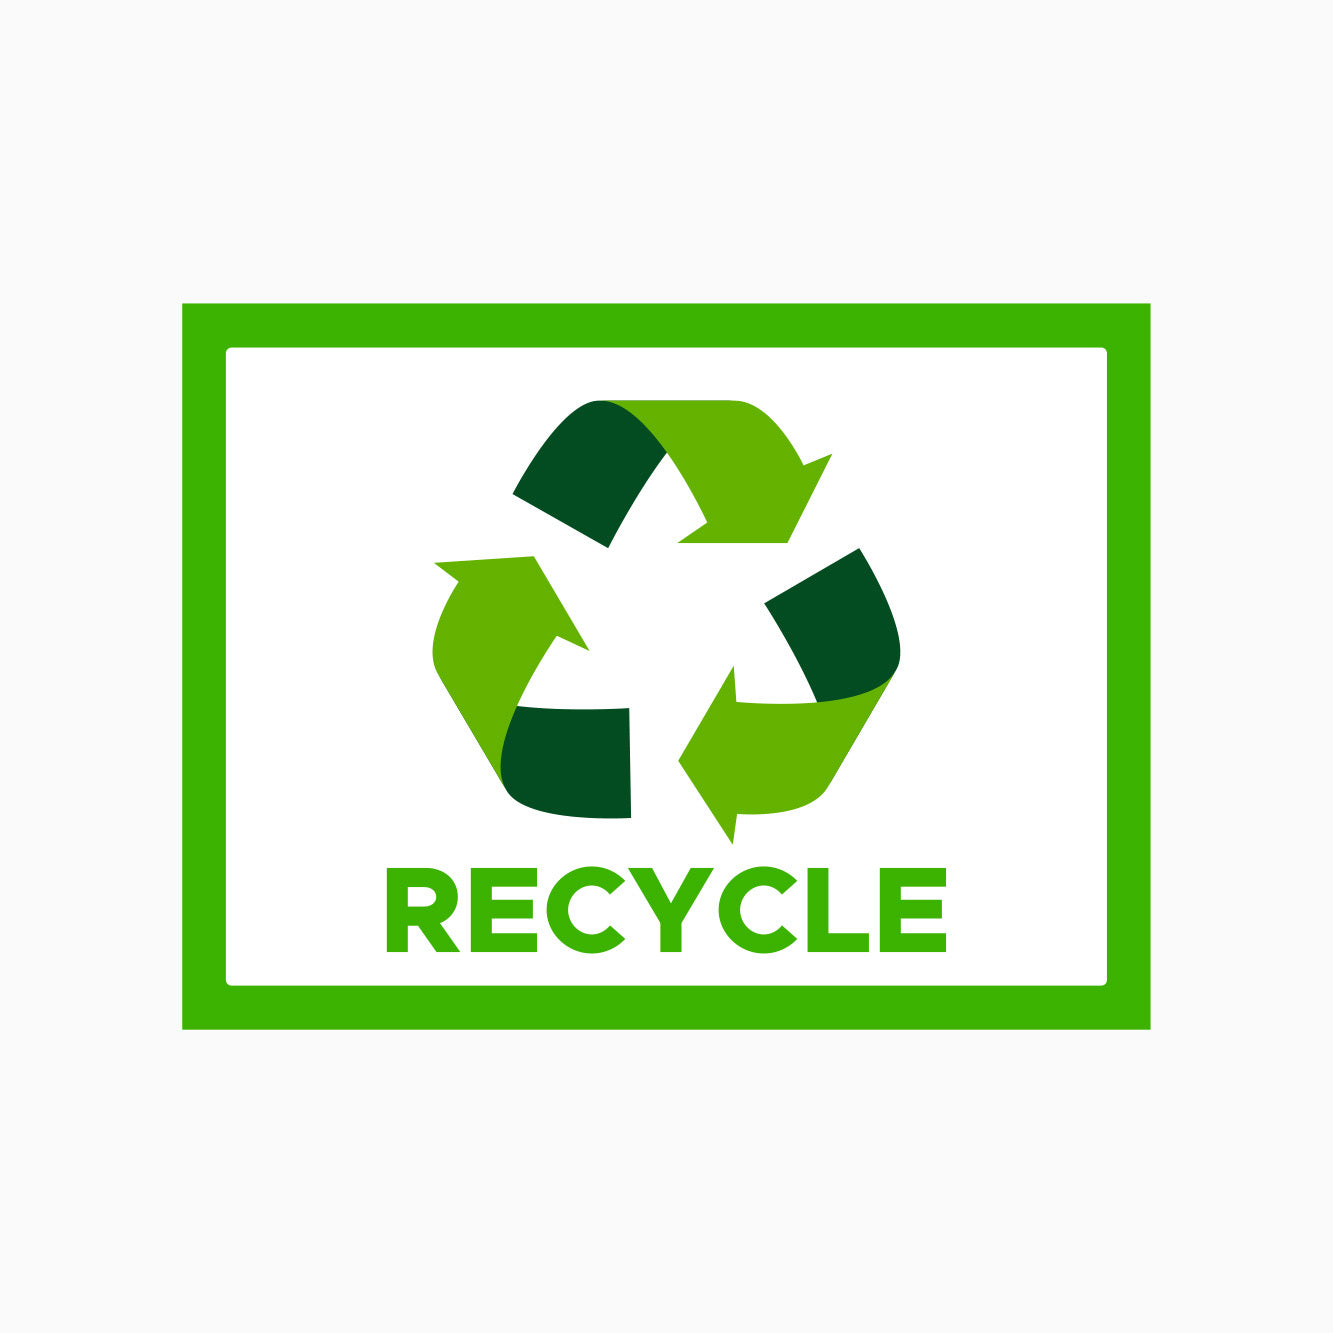 RECYCLE SIGN - Bin Signs in Australia at GET SIGNS